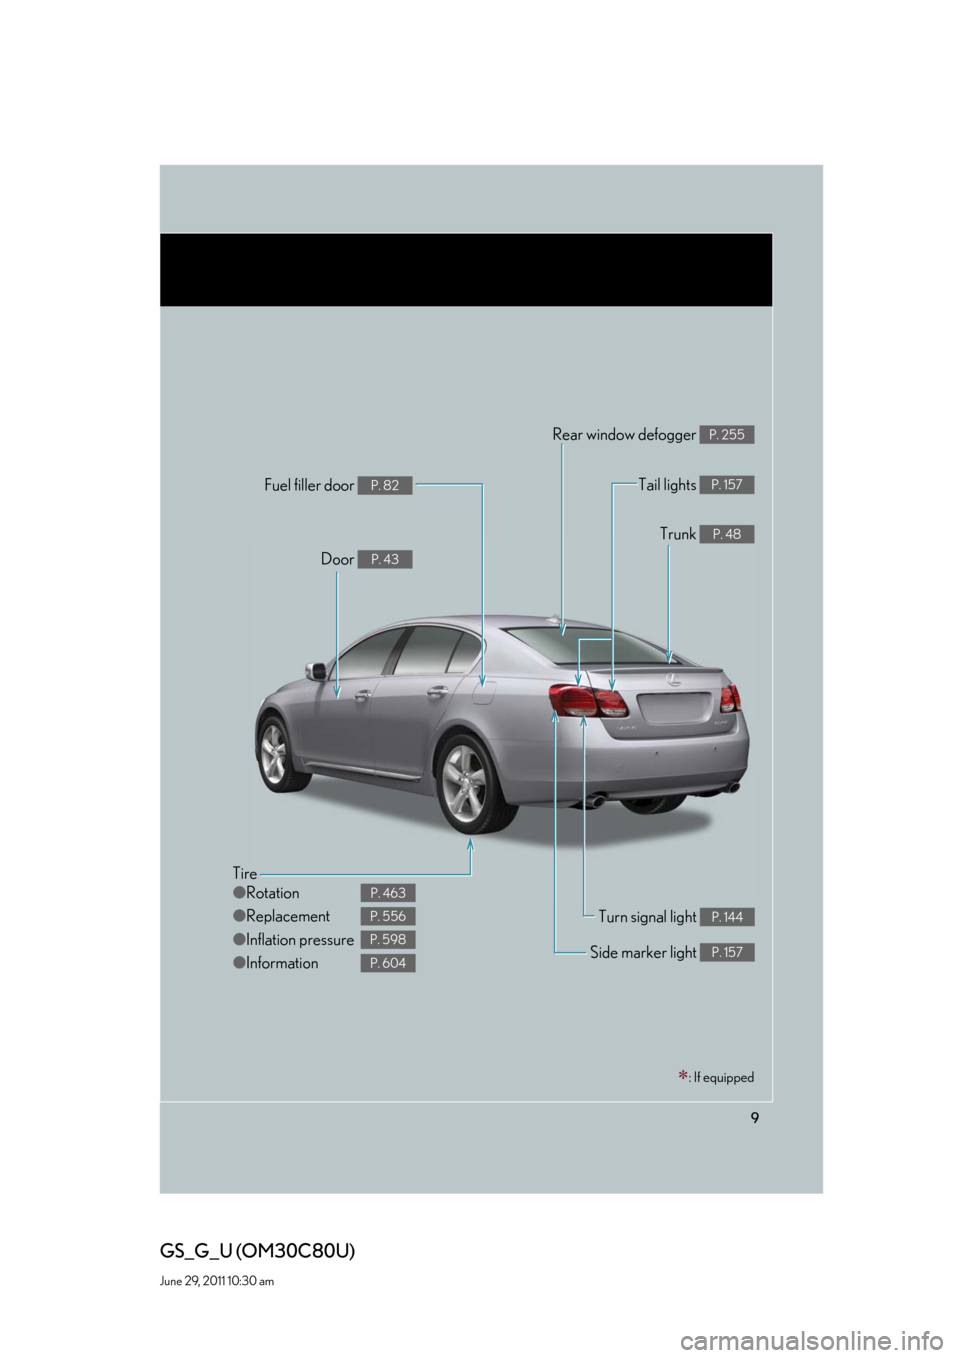 Lexus GS350 2010  Using The Audio System / LEXUS 2010 GS460 GS350 OWNERS MANUAL (OM30C80U) 9
GS_G_U (OM30C80U)
June 29, 2011 10:30 am
Tire
●Rotation
●Replacement
●Inflation pressure
●Information
P. 463
P. 556
P. 598
P. 604
Tail lights P. 157
Side marker light P. 157
Trunk P. 48
Rear